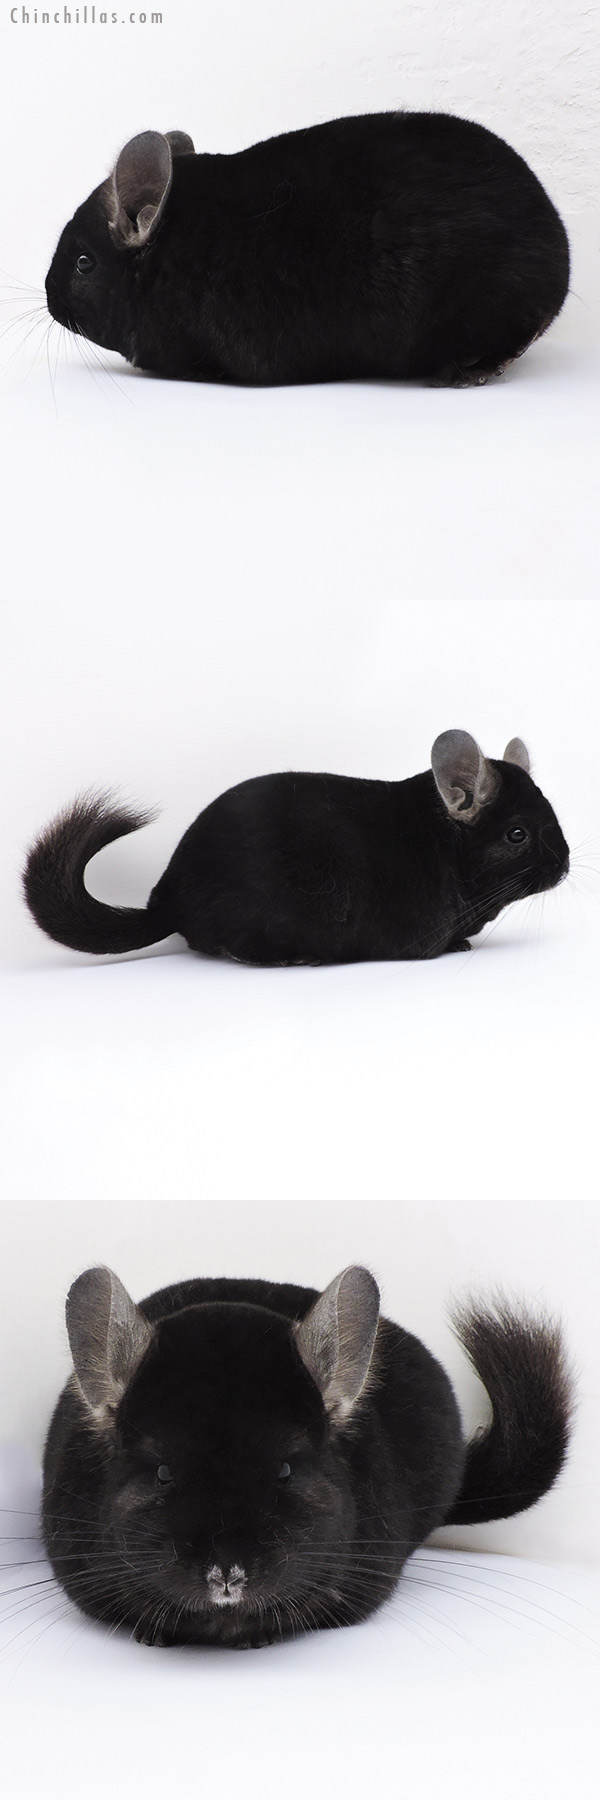 Chinchilla or related item offered for sale or export on Chinchillas.com - 19102 Premium Production Quality Ebony Female Chinchilla